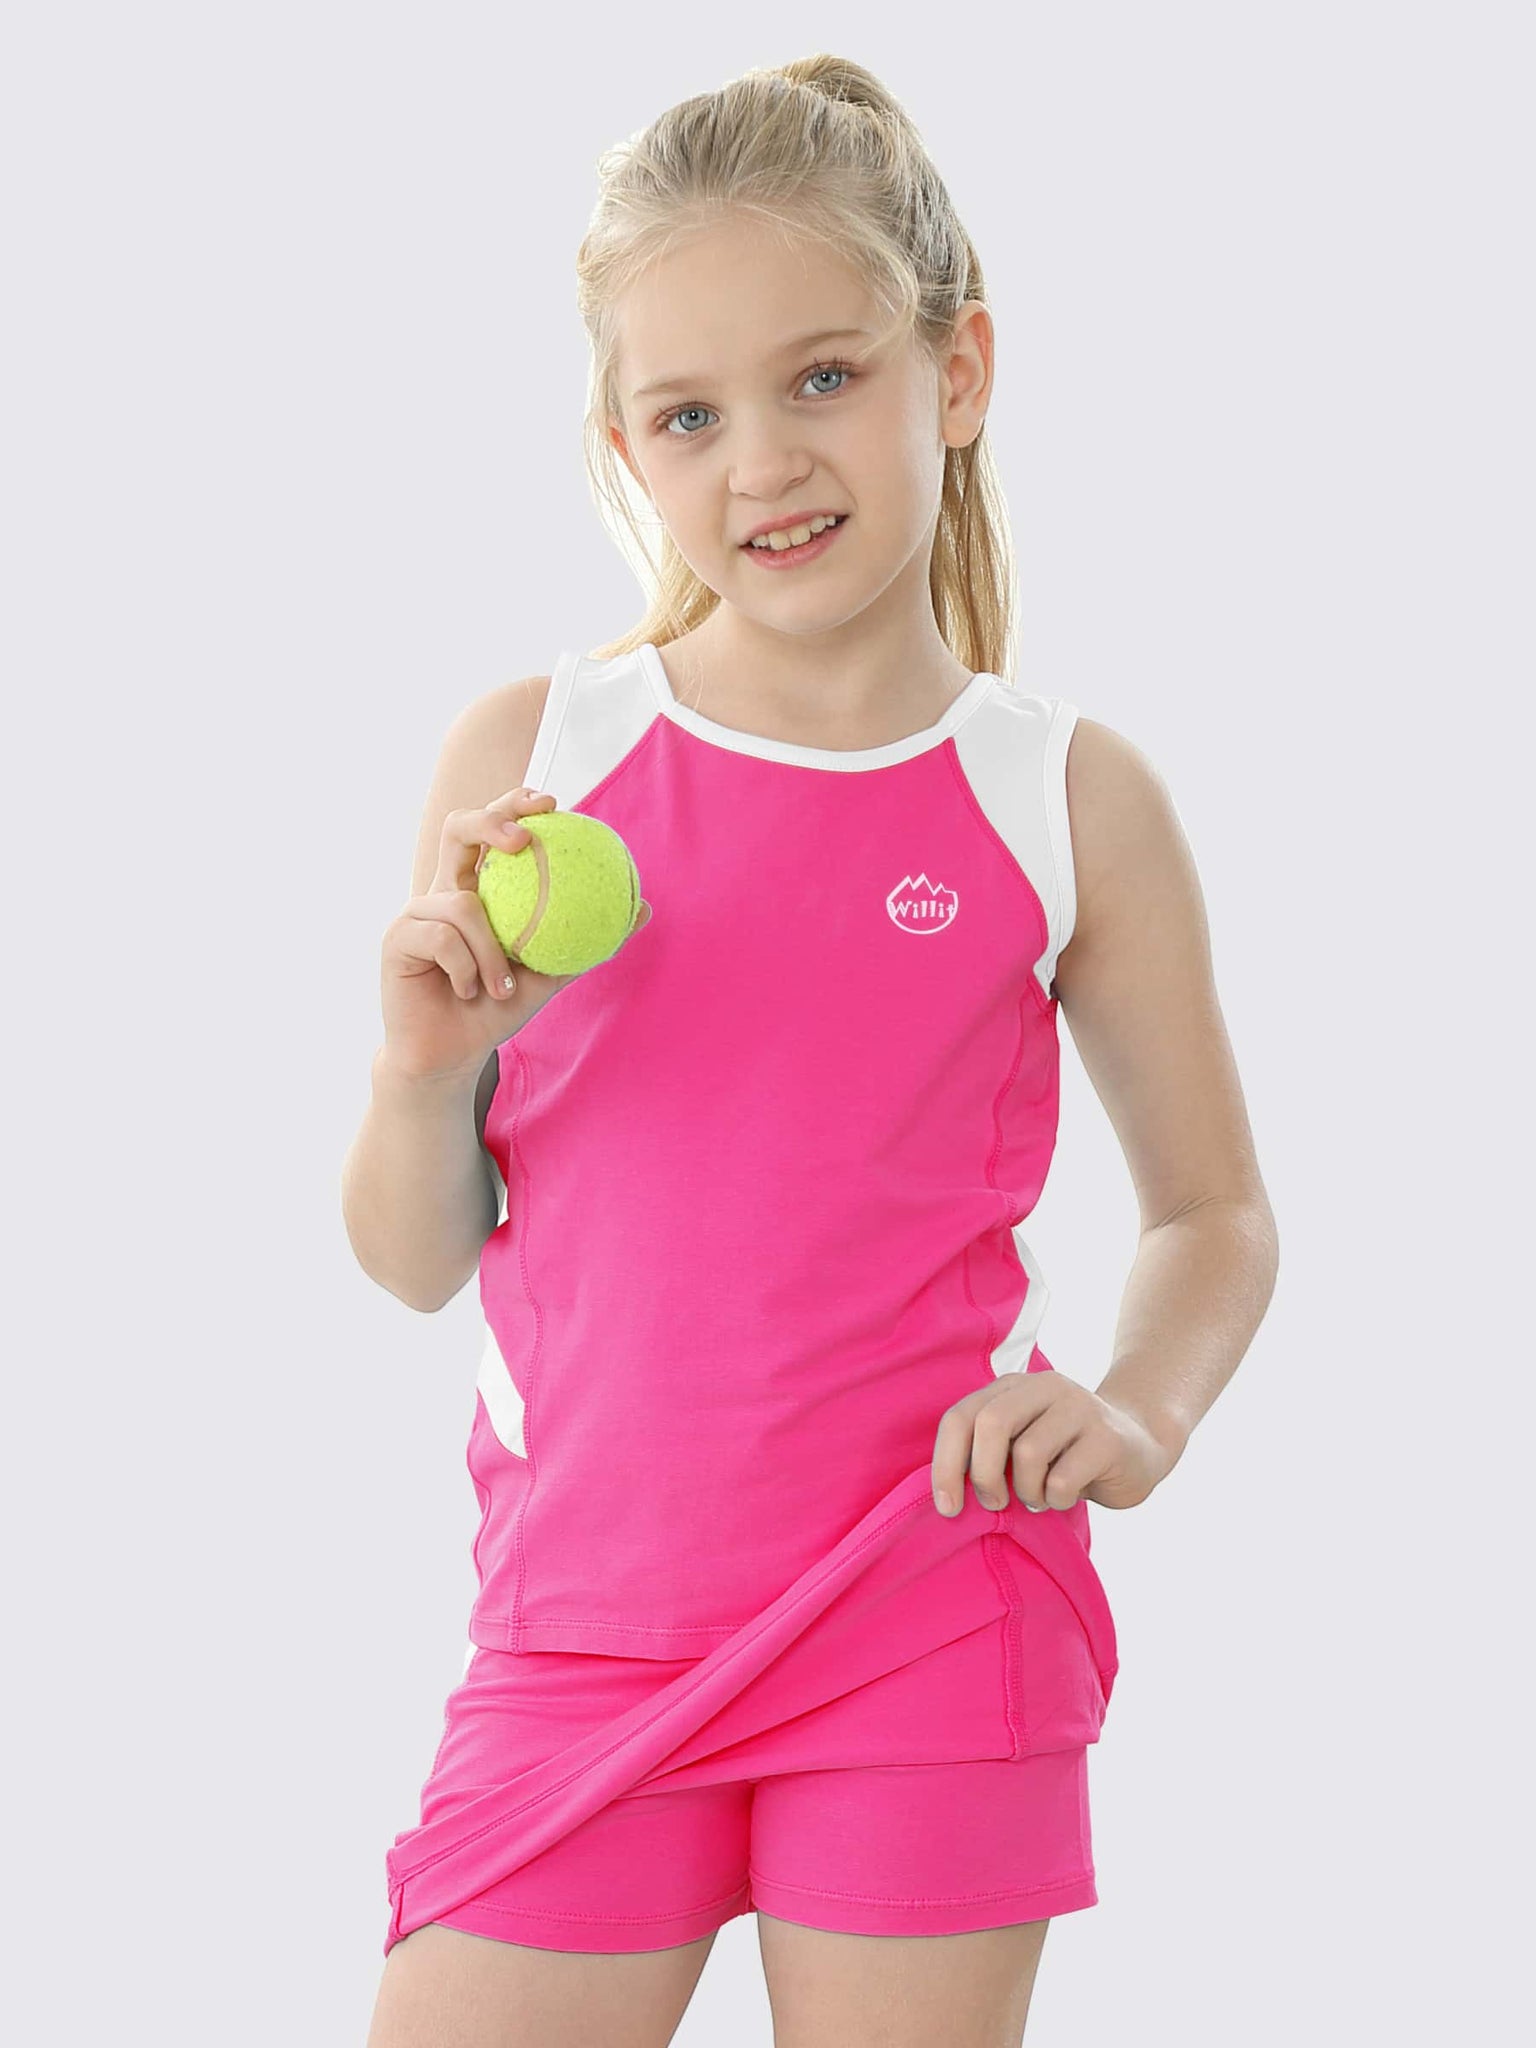 Willit Girls' Tennis Outfit_RoseRed_model3